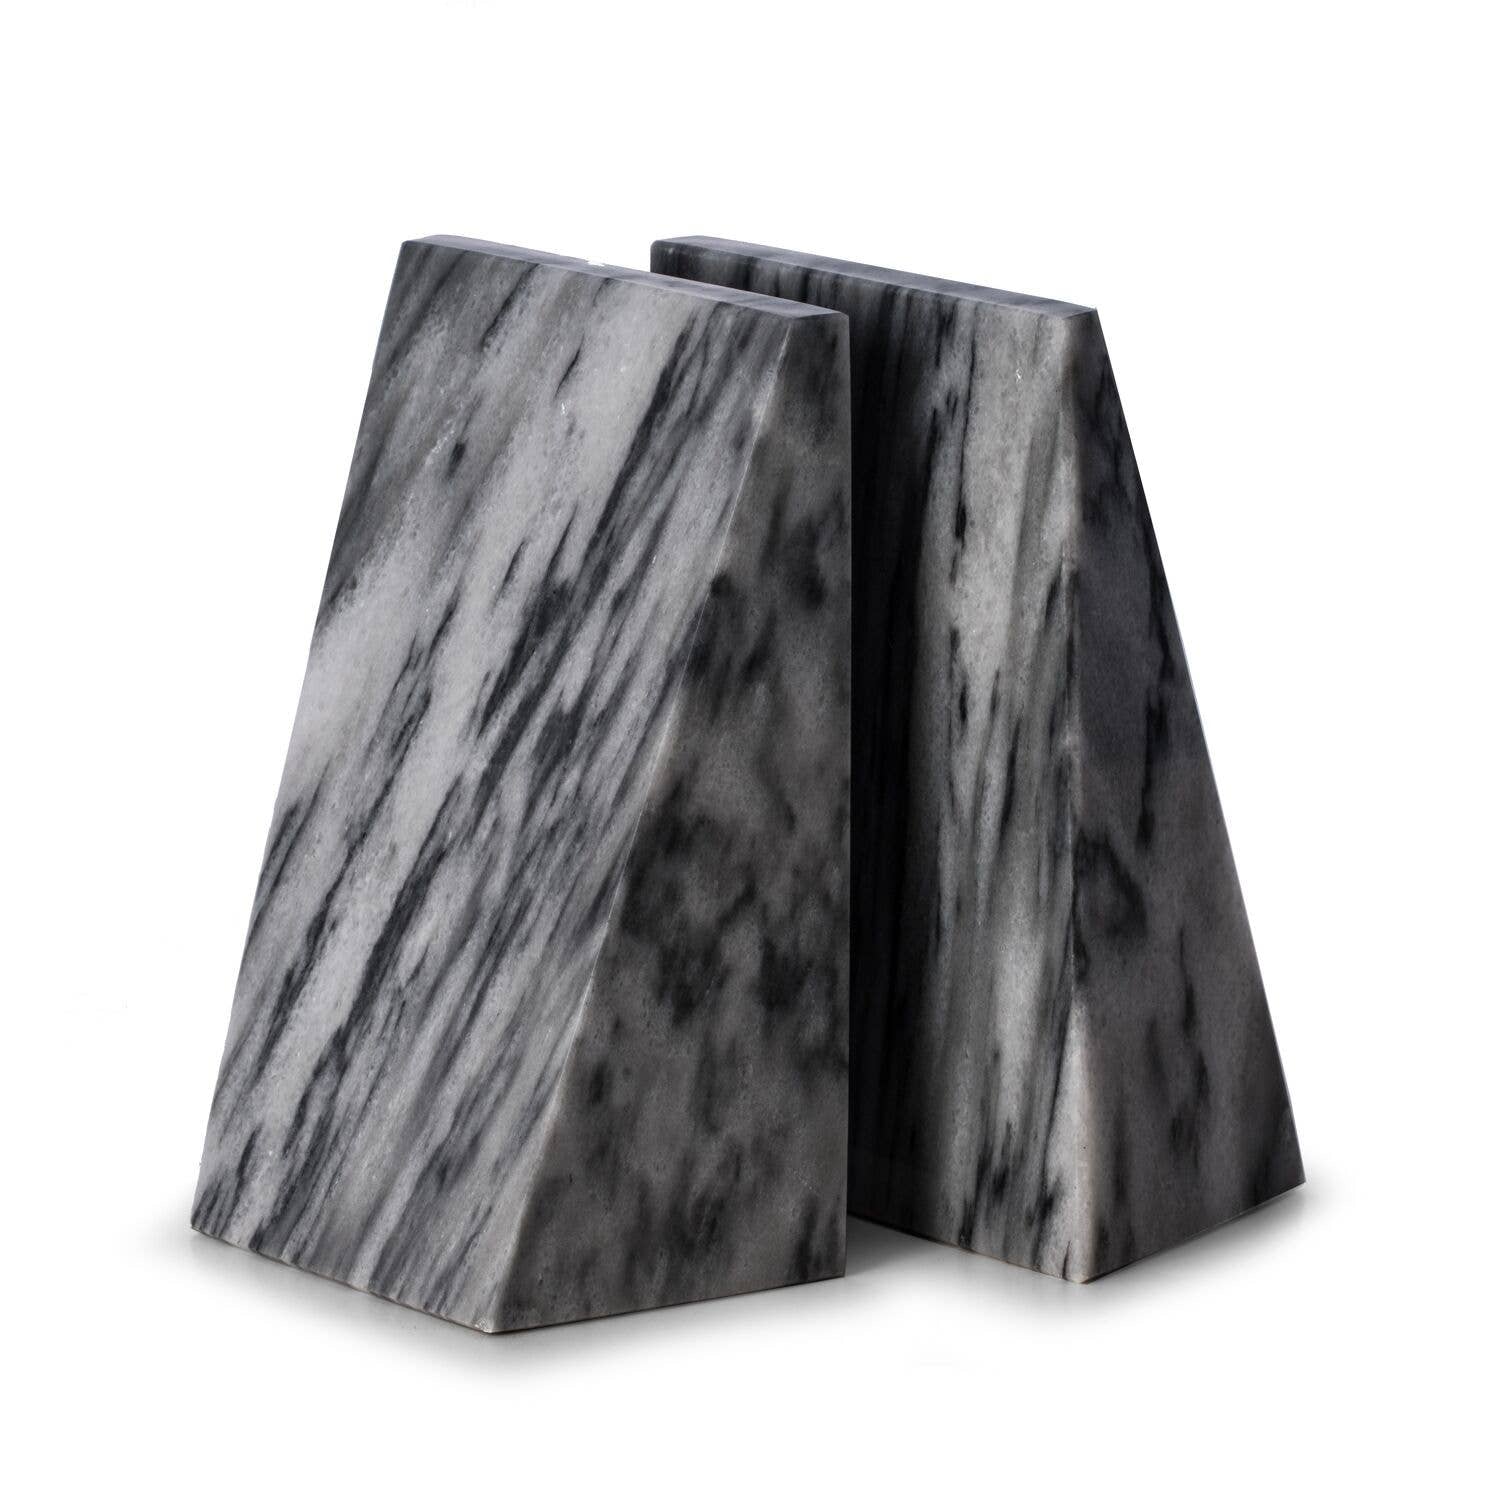 Grey Marble Wedge Bookend Set - Spiral Circle